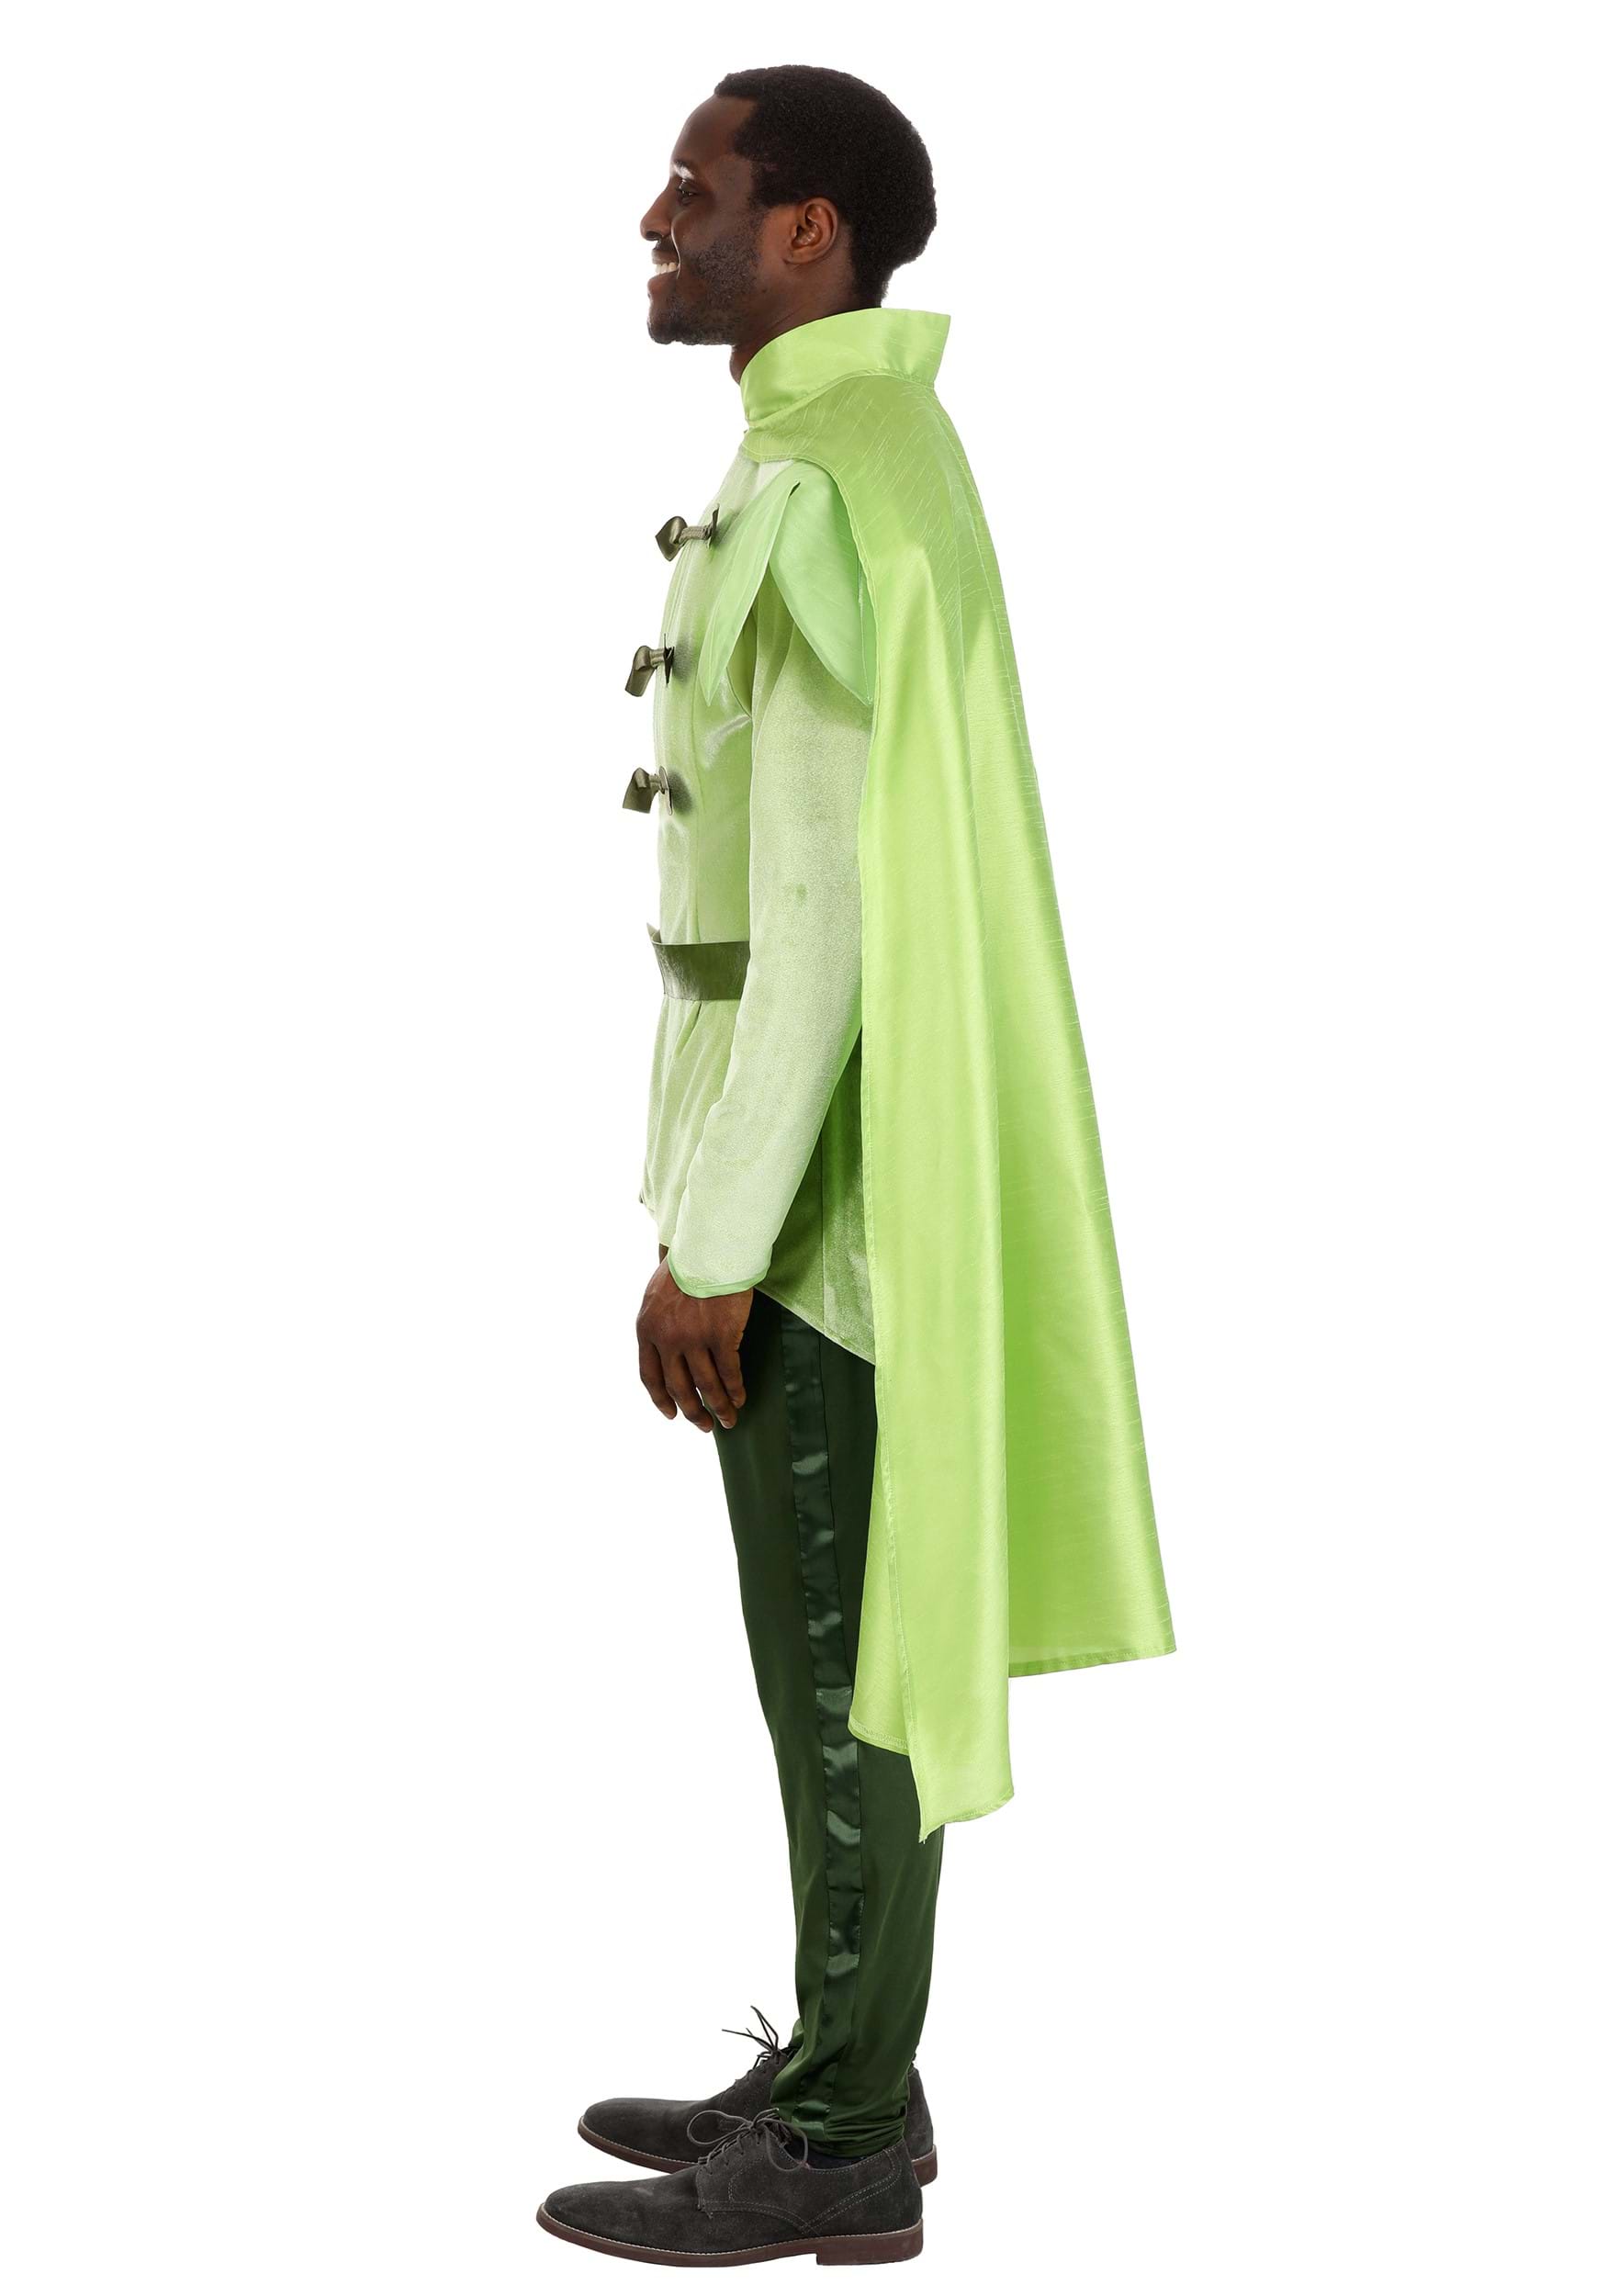 Disney Prince Naveen Costume For Adults